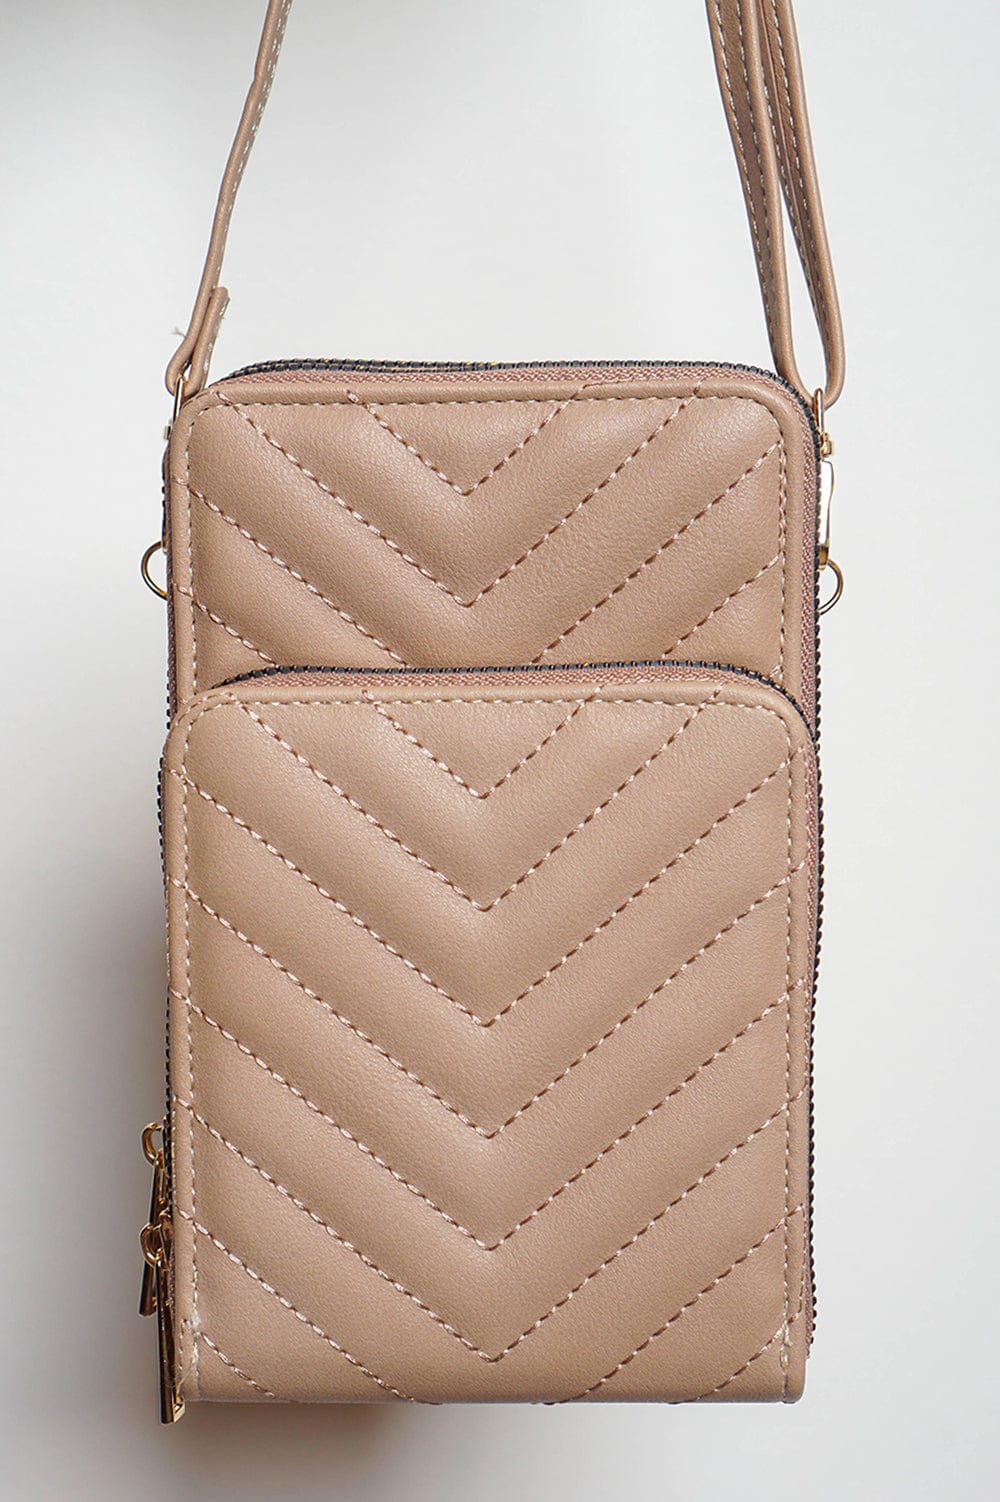 Stone Quilted Phone Holder Bag - Chloe Dao